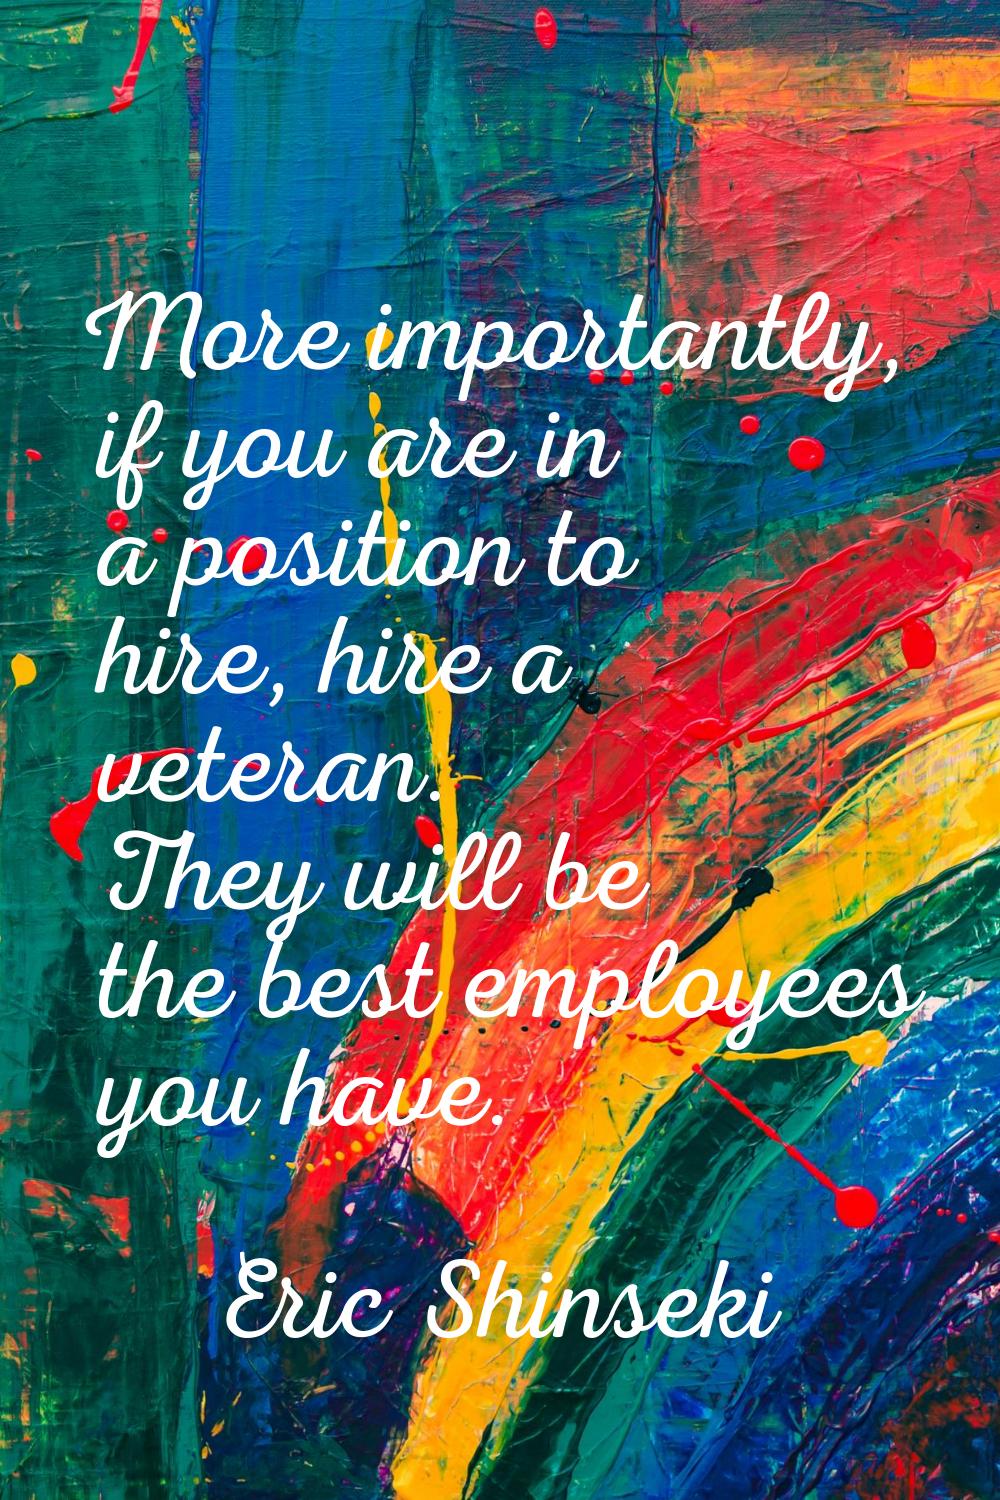 More importantly, if you are in a position to hire, hire a veteran. They will be the best employees